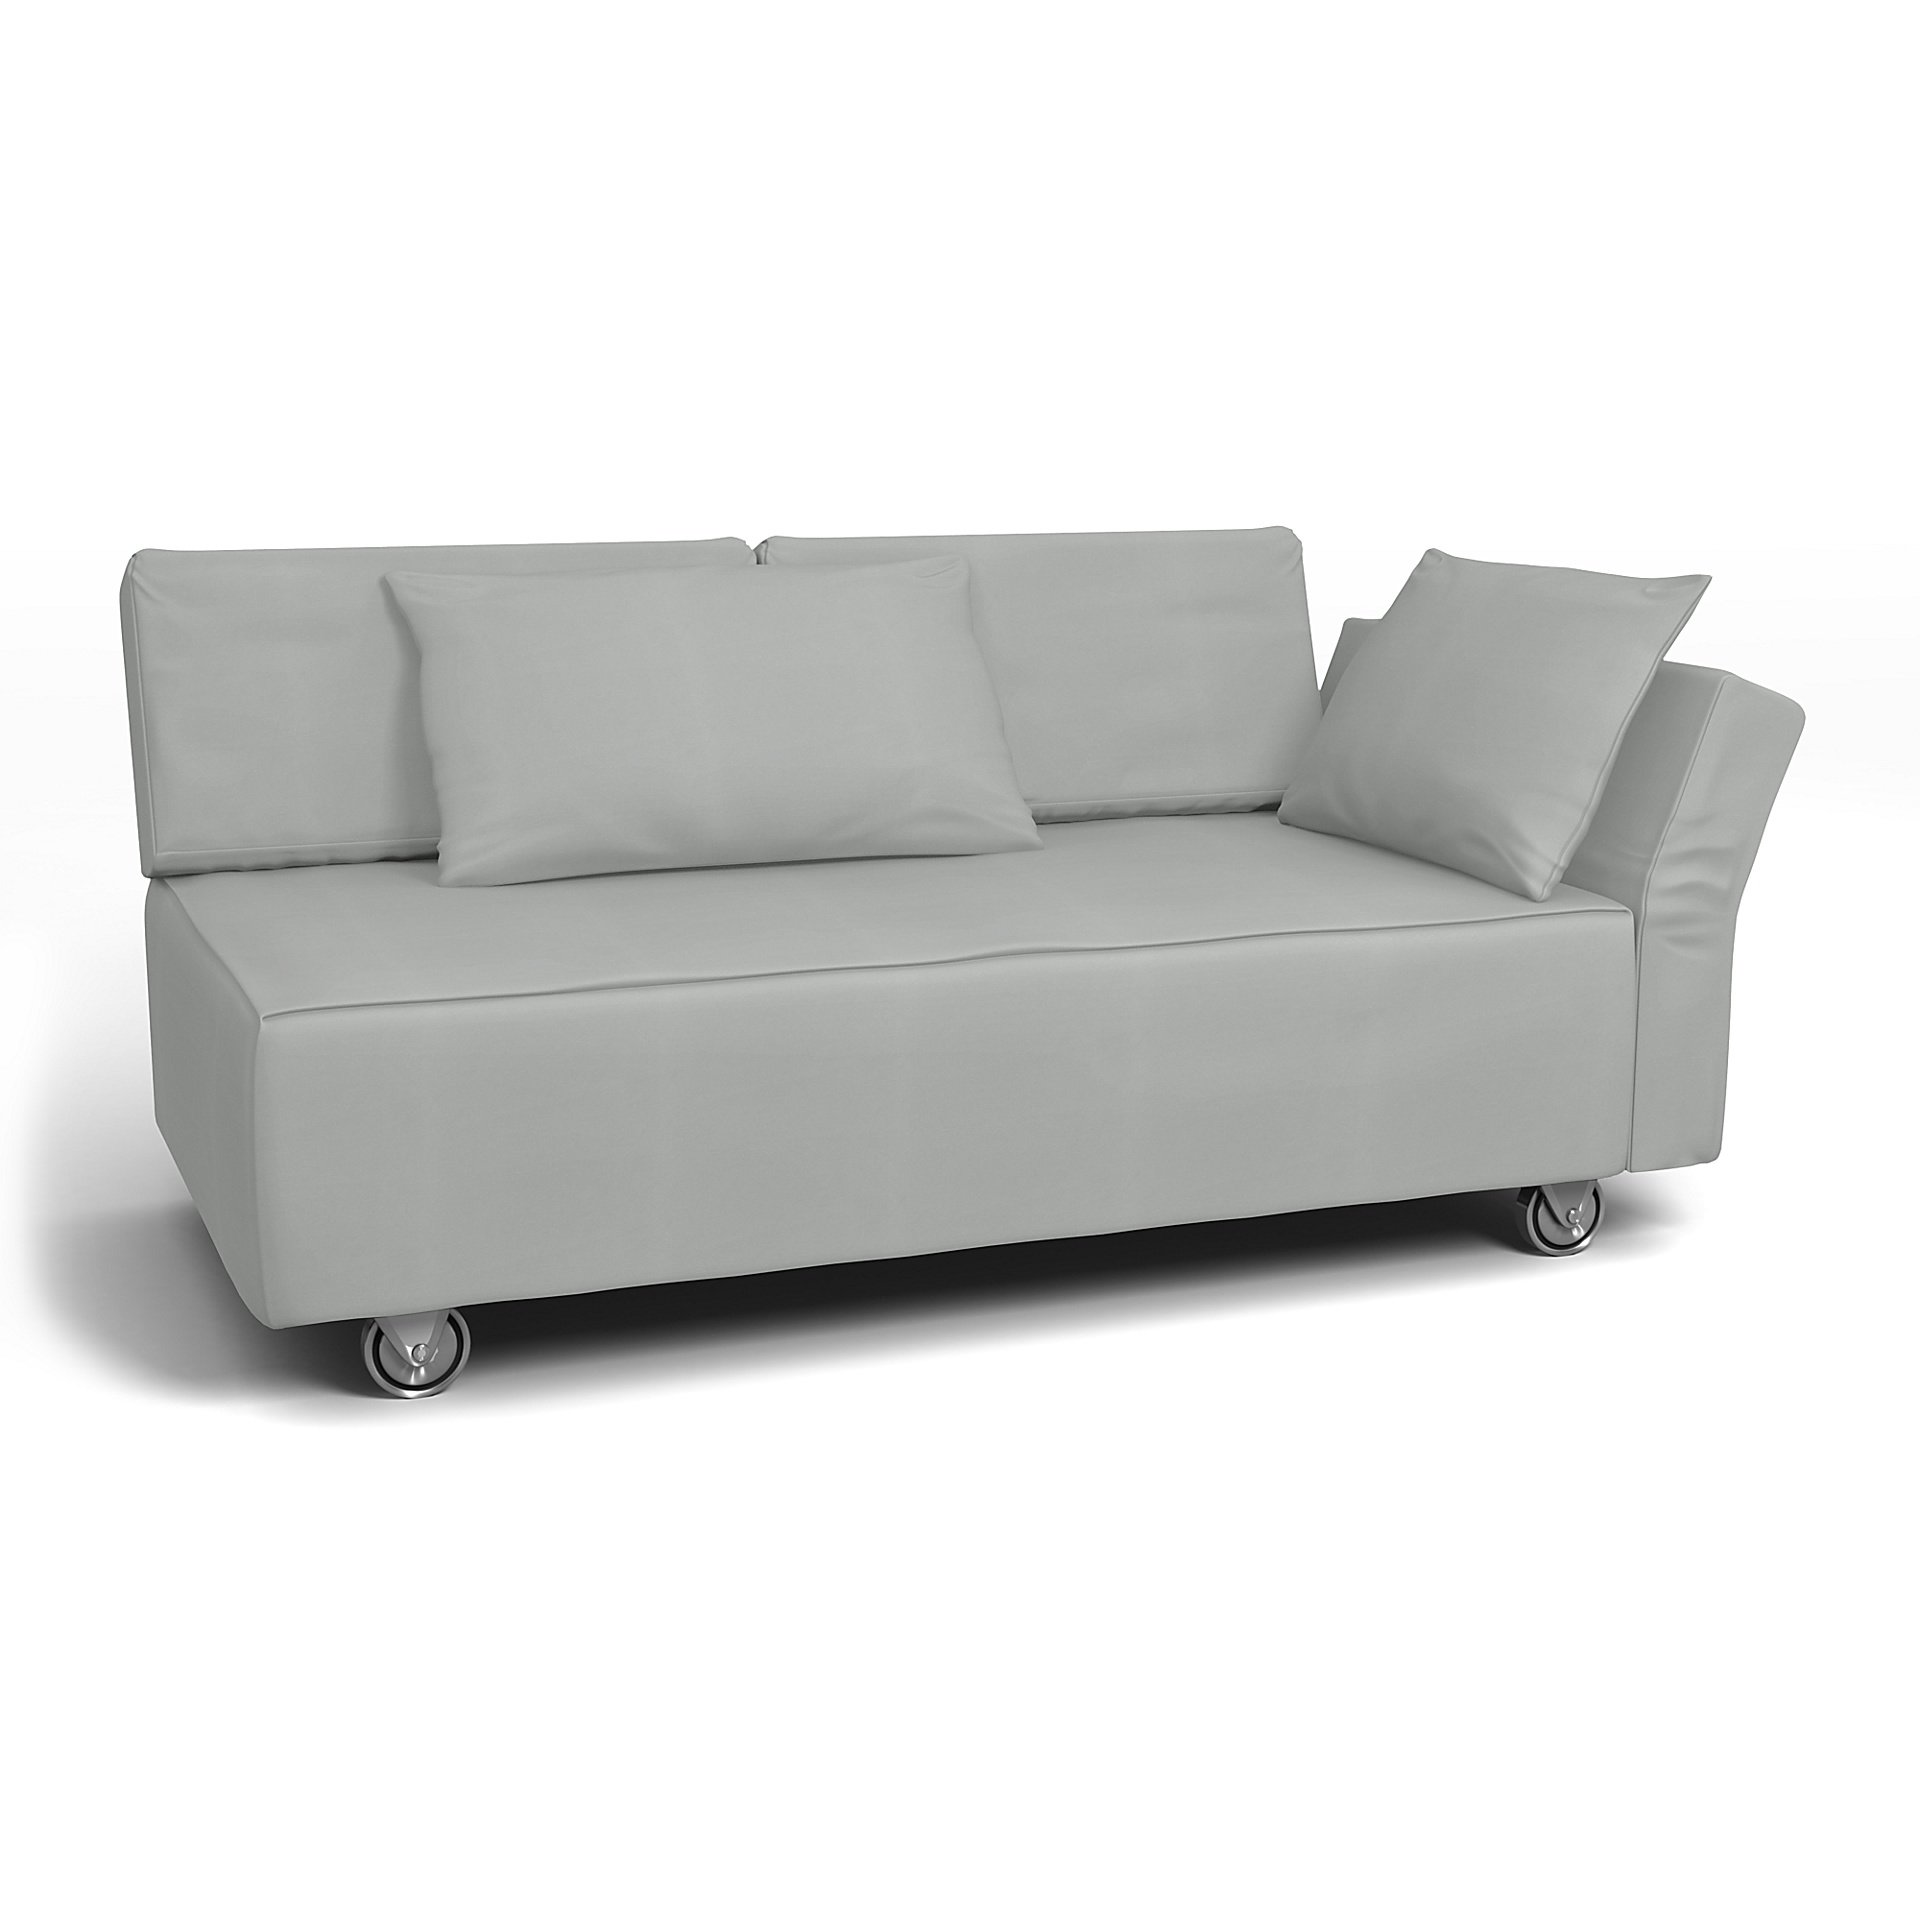 IKEA - Falsterbo 2 Seat Sofa with Right Arm Cover, Silver Grey, Cotton - Bemz